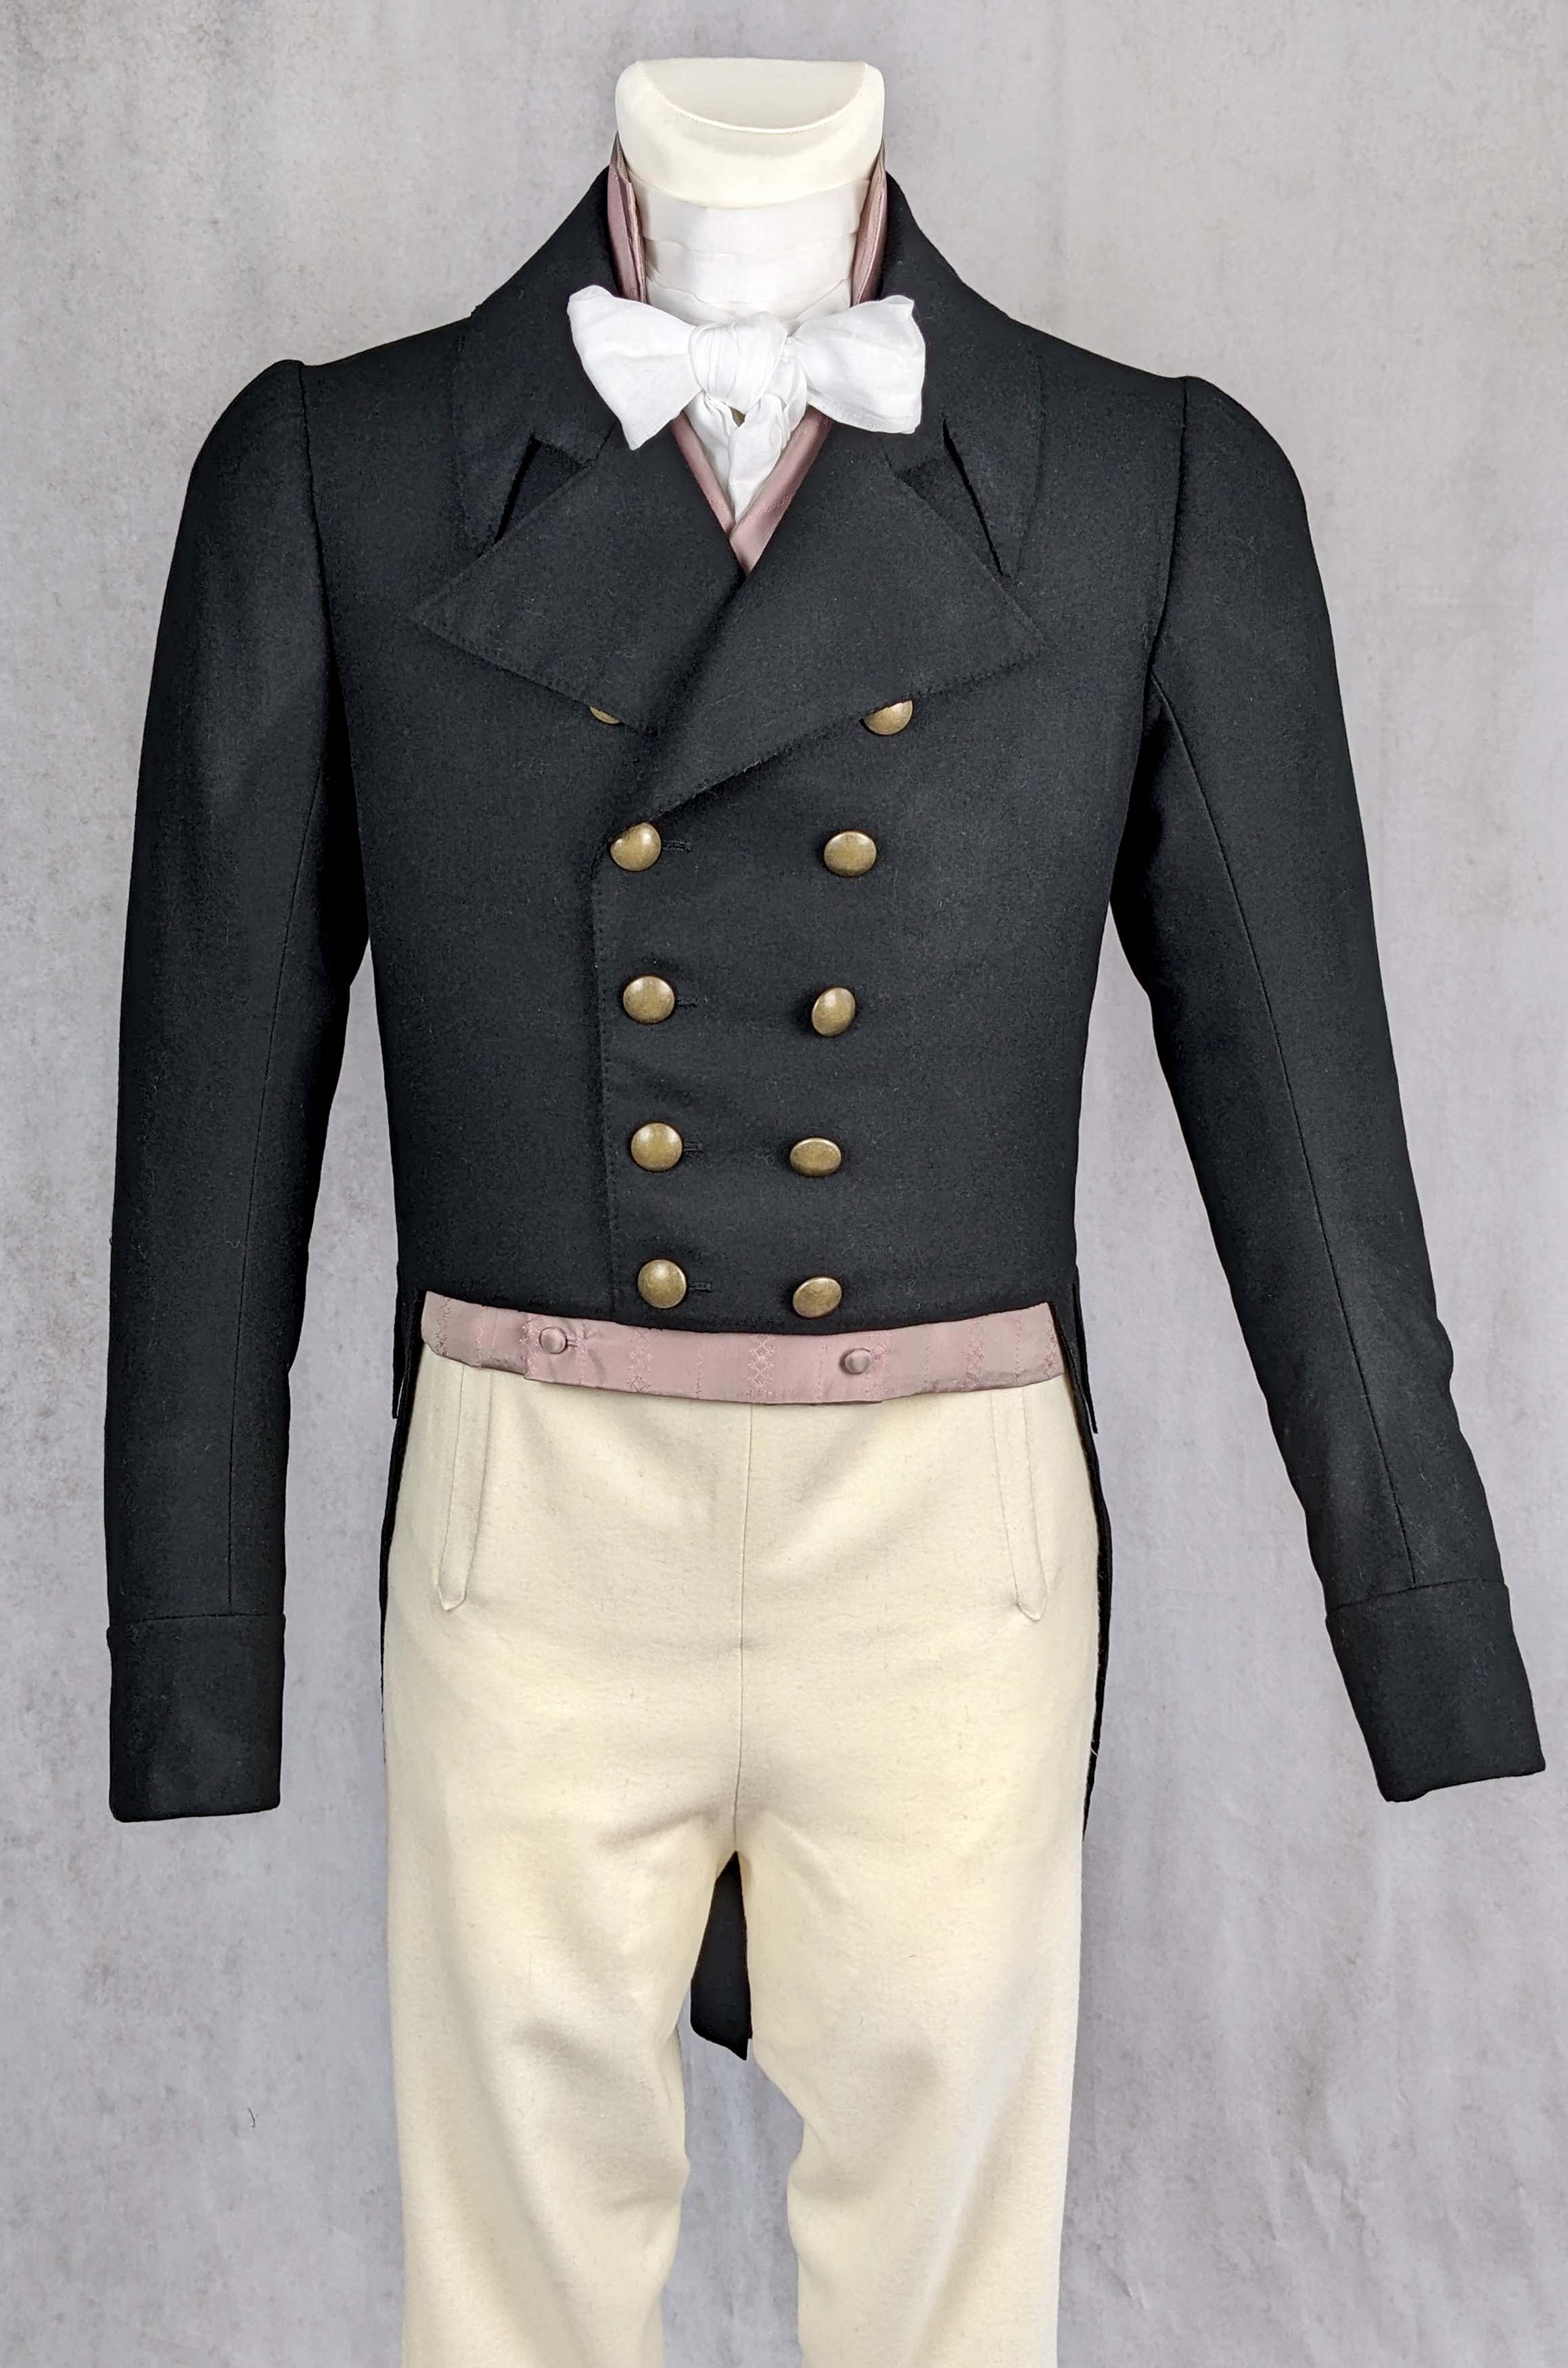 Empire Regency Mens Tailcoat from 1800 Sewing Pattern #0322 Size US 34-56 (EU 44-66)